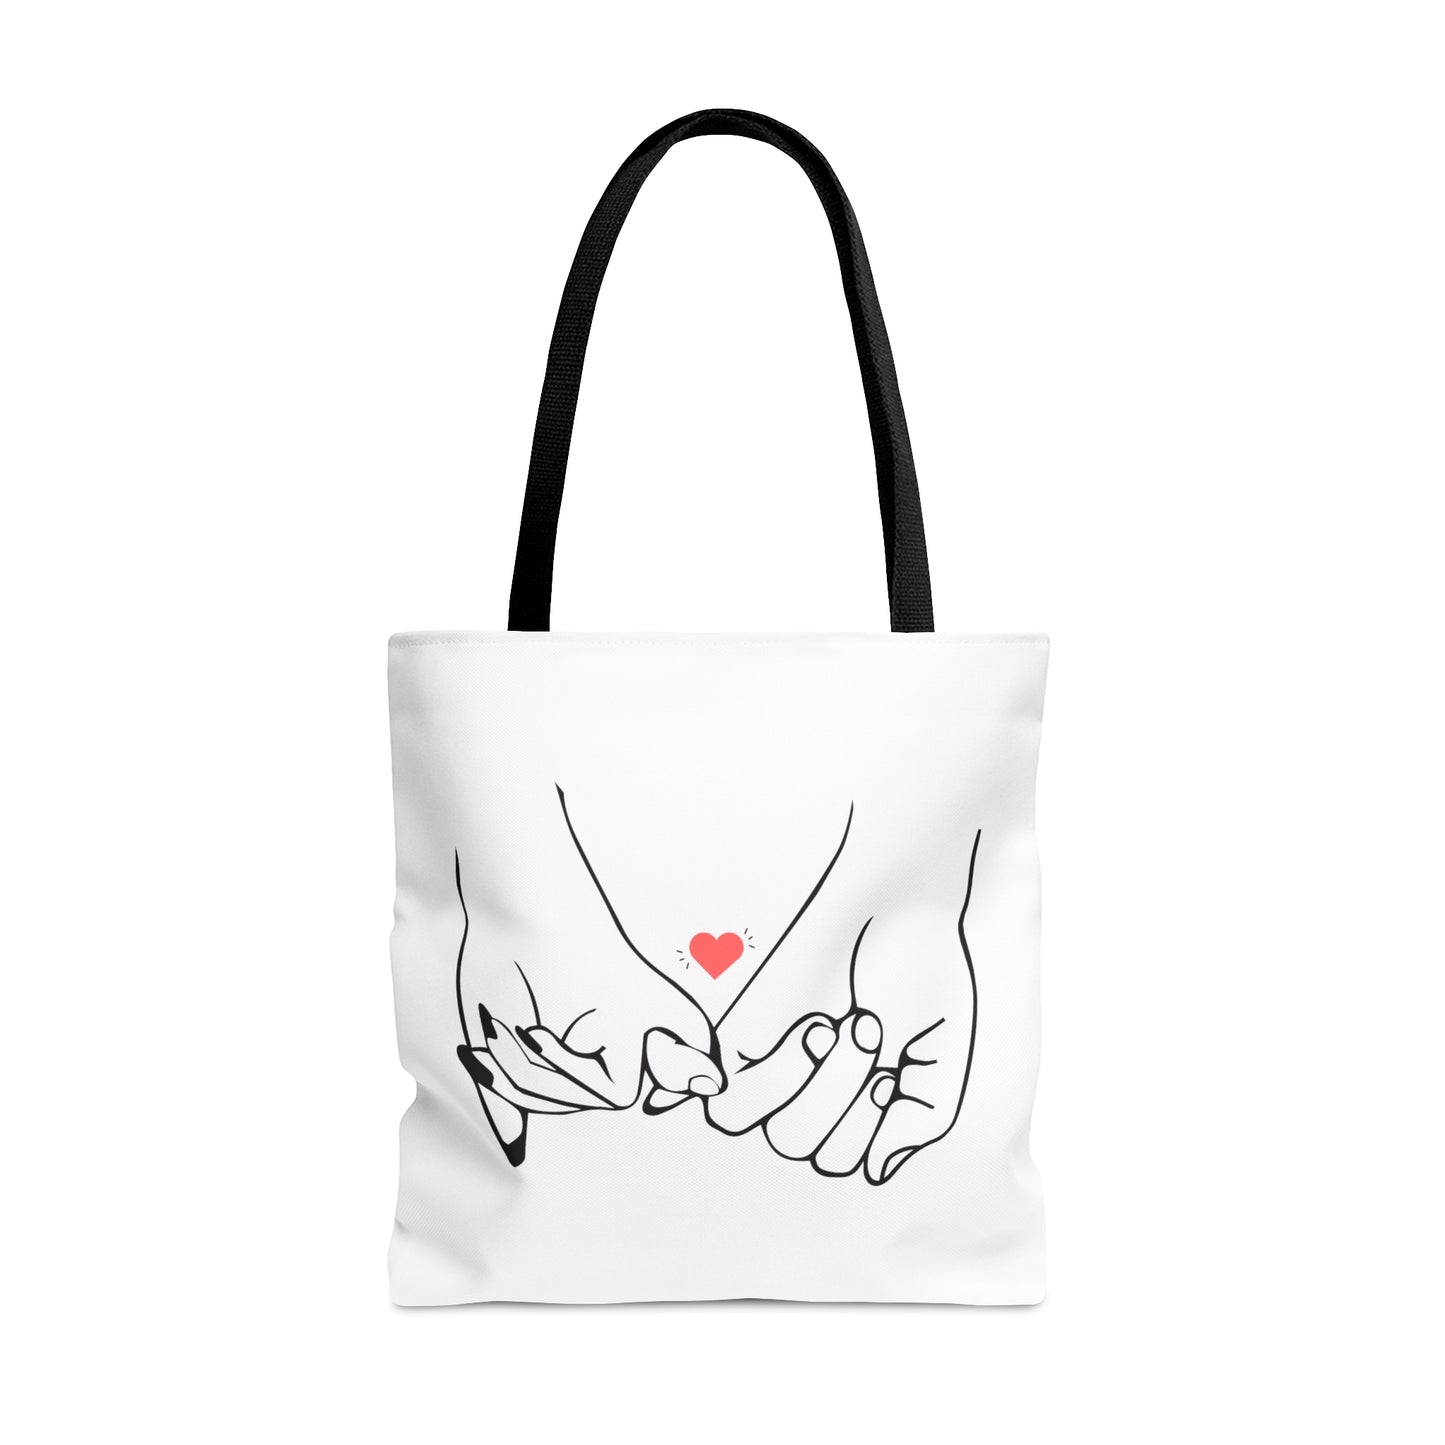 Love You with Hands Printed Tote Bag, Reusable Tote Bag for Valentine's Day